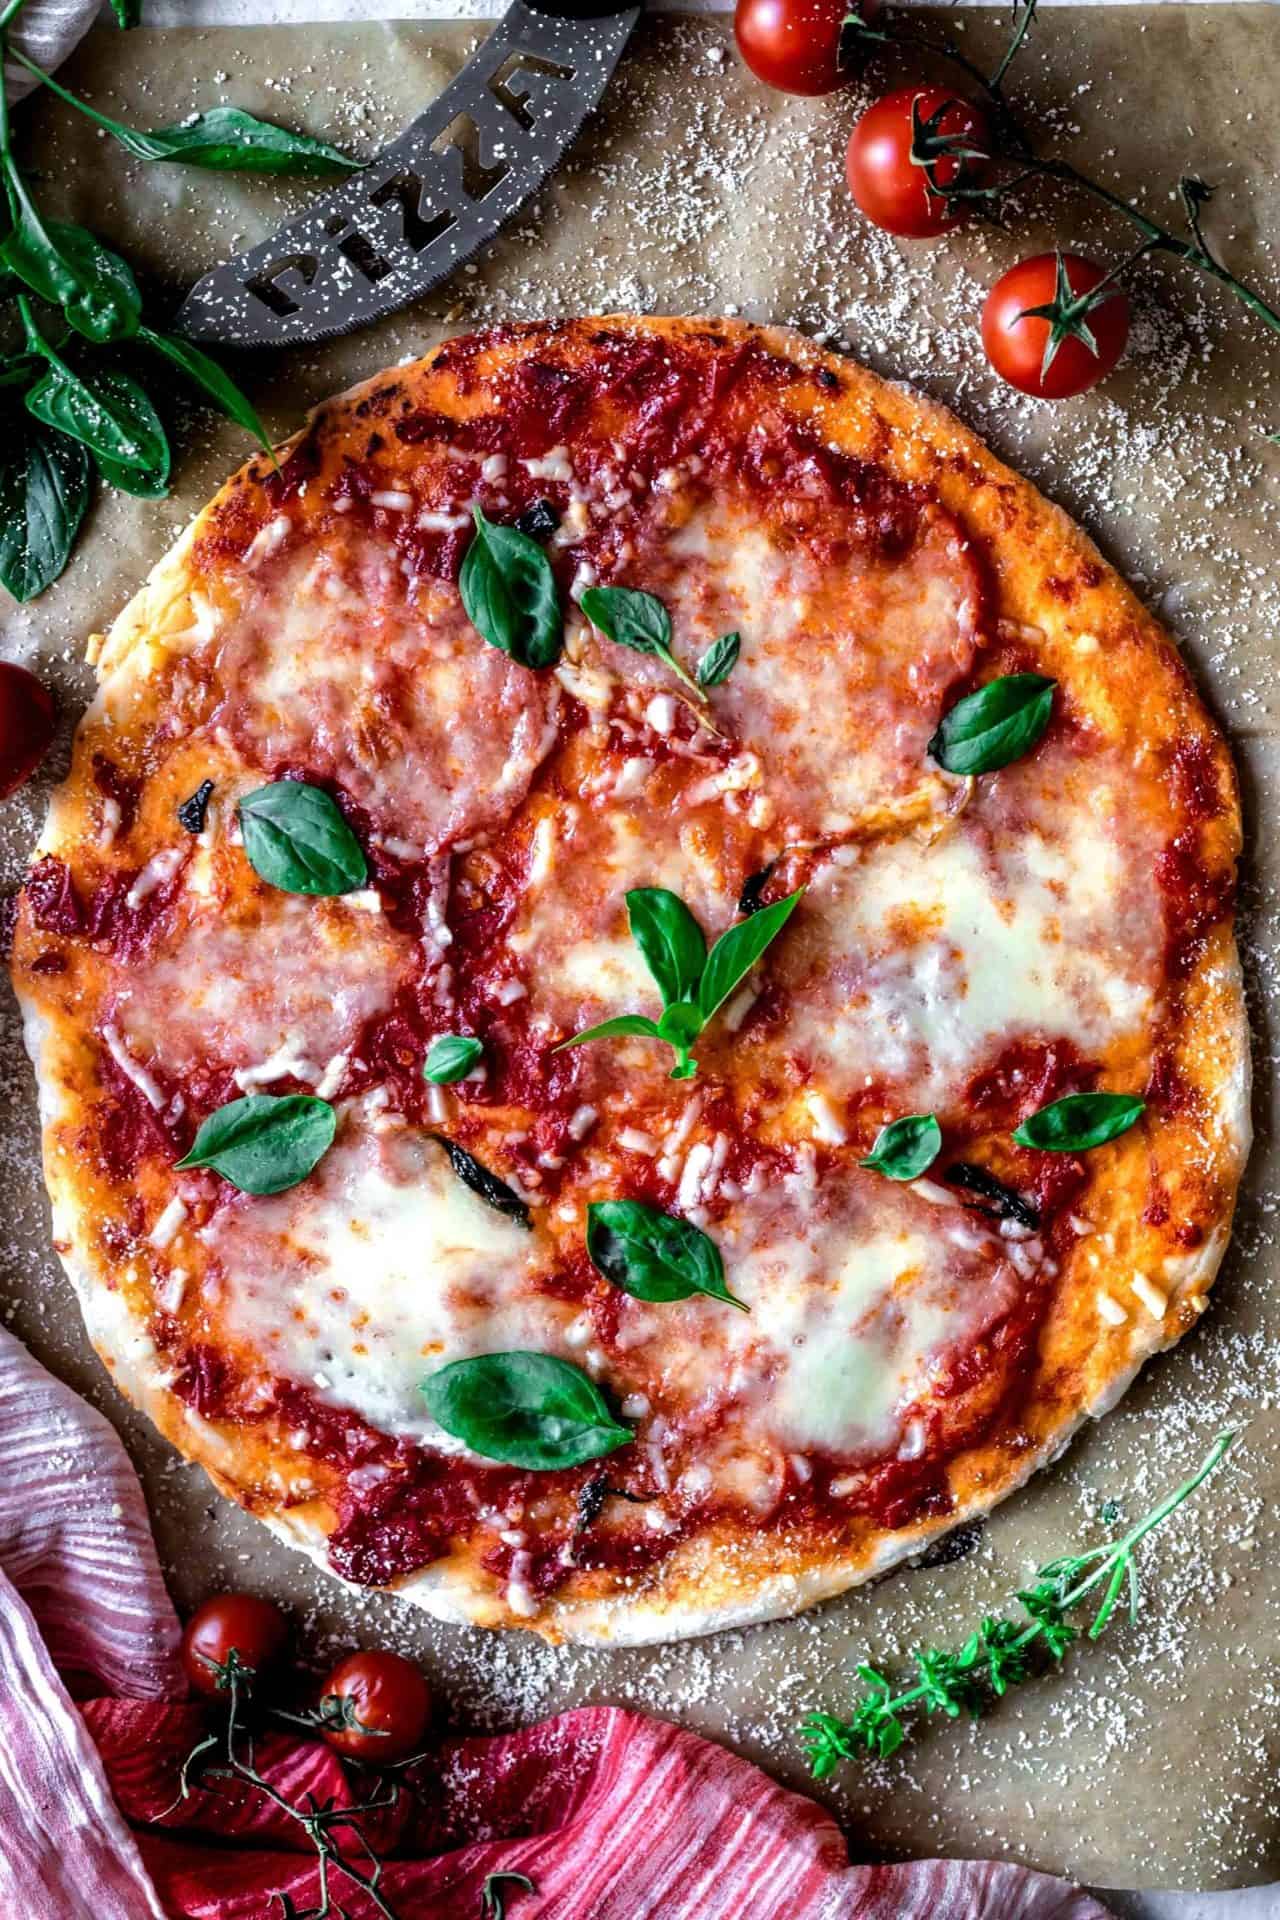 This Gluten-Free Pizza Crust is thin, perfectly crisp on the edges and tender in the center, requires only 7 ingredients and it is so delicious!